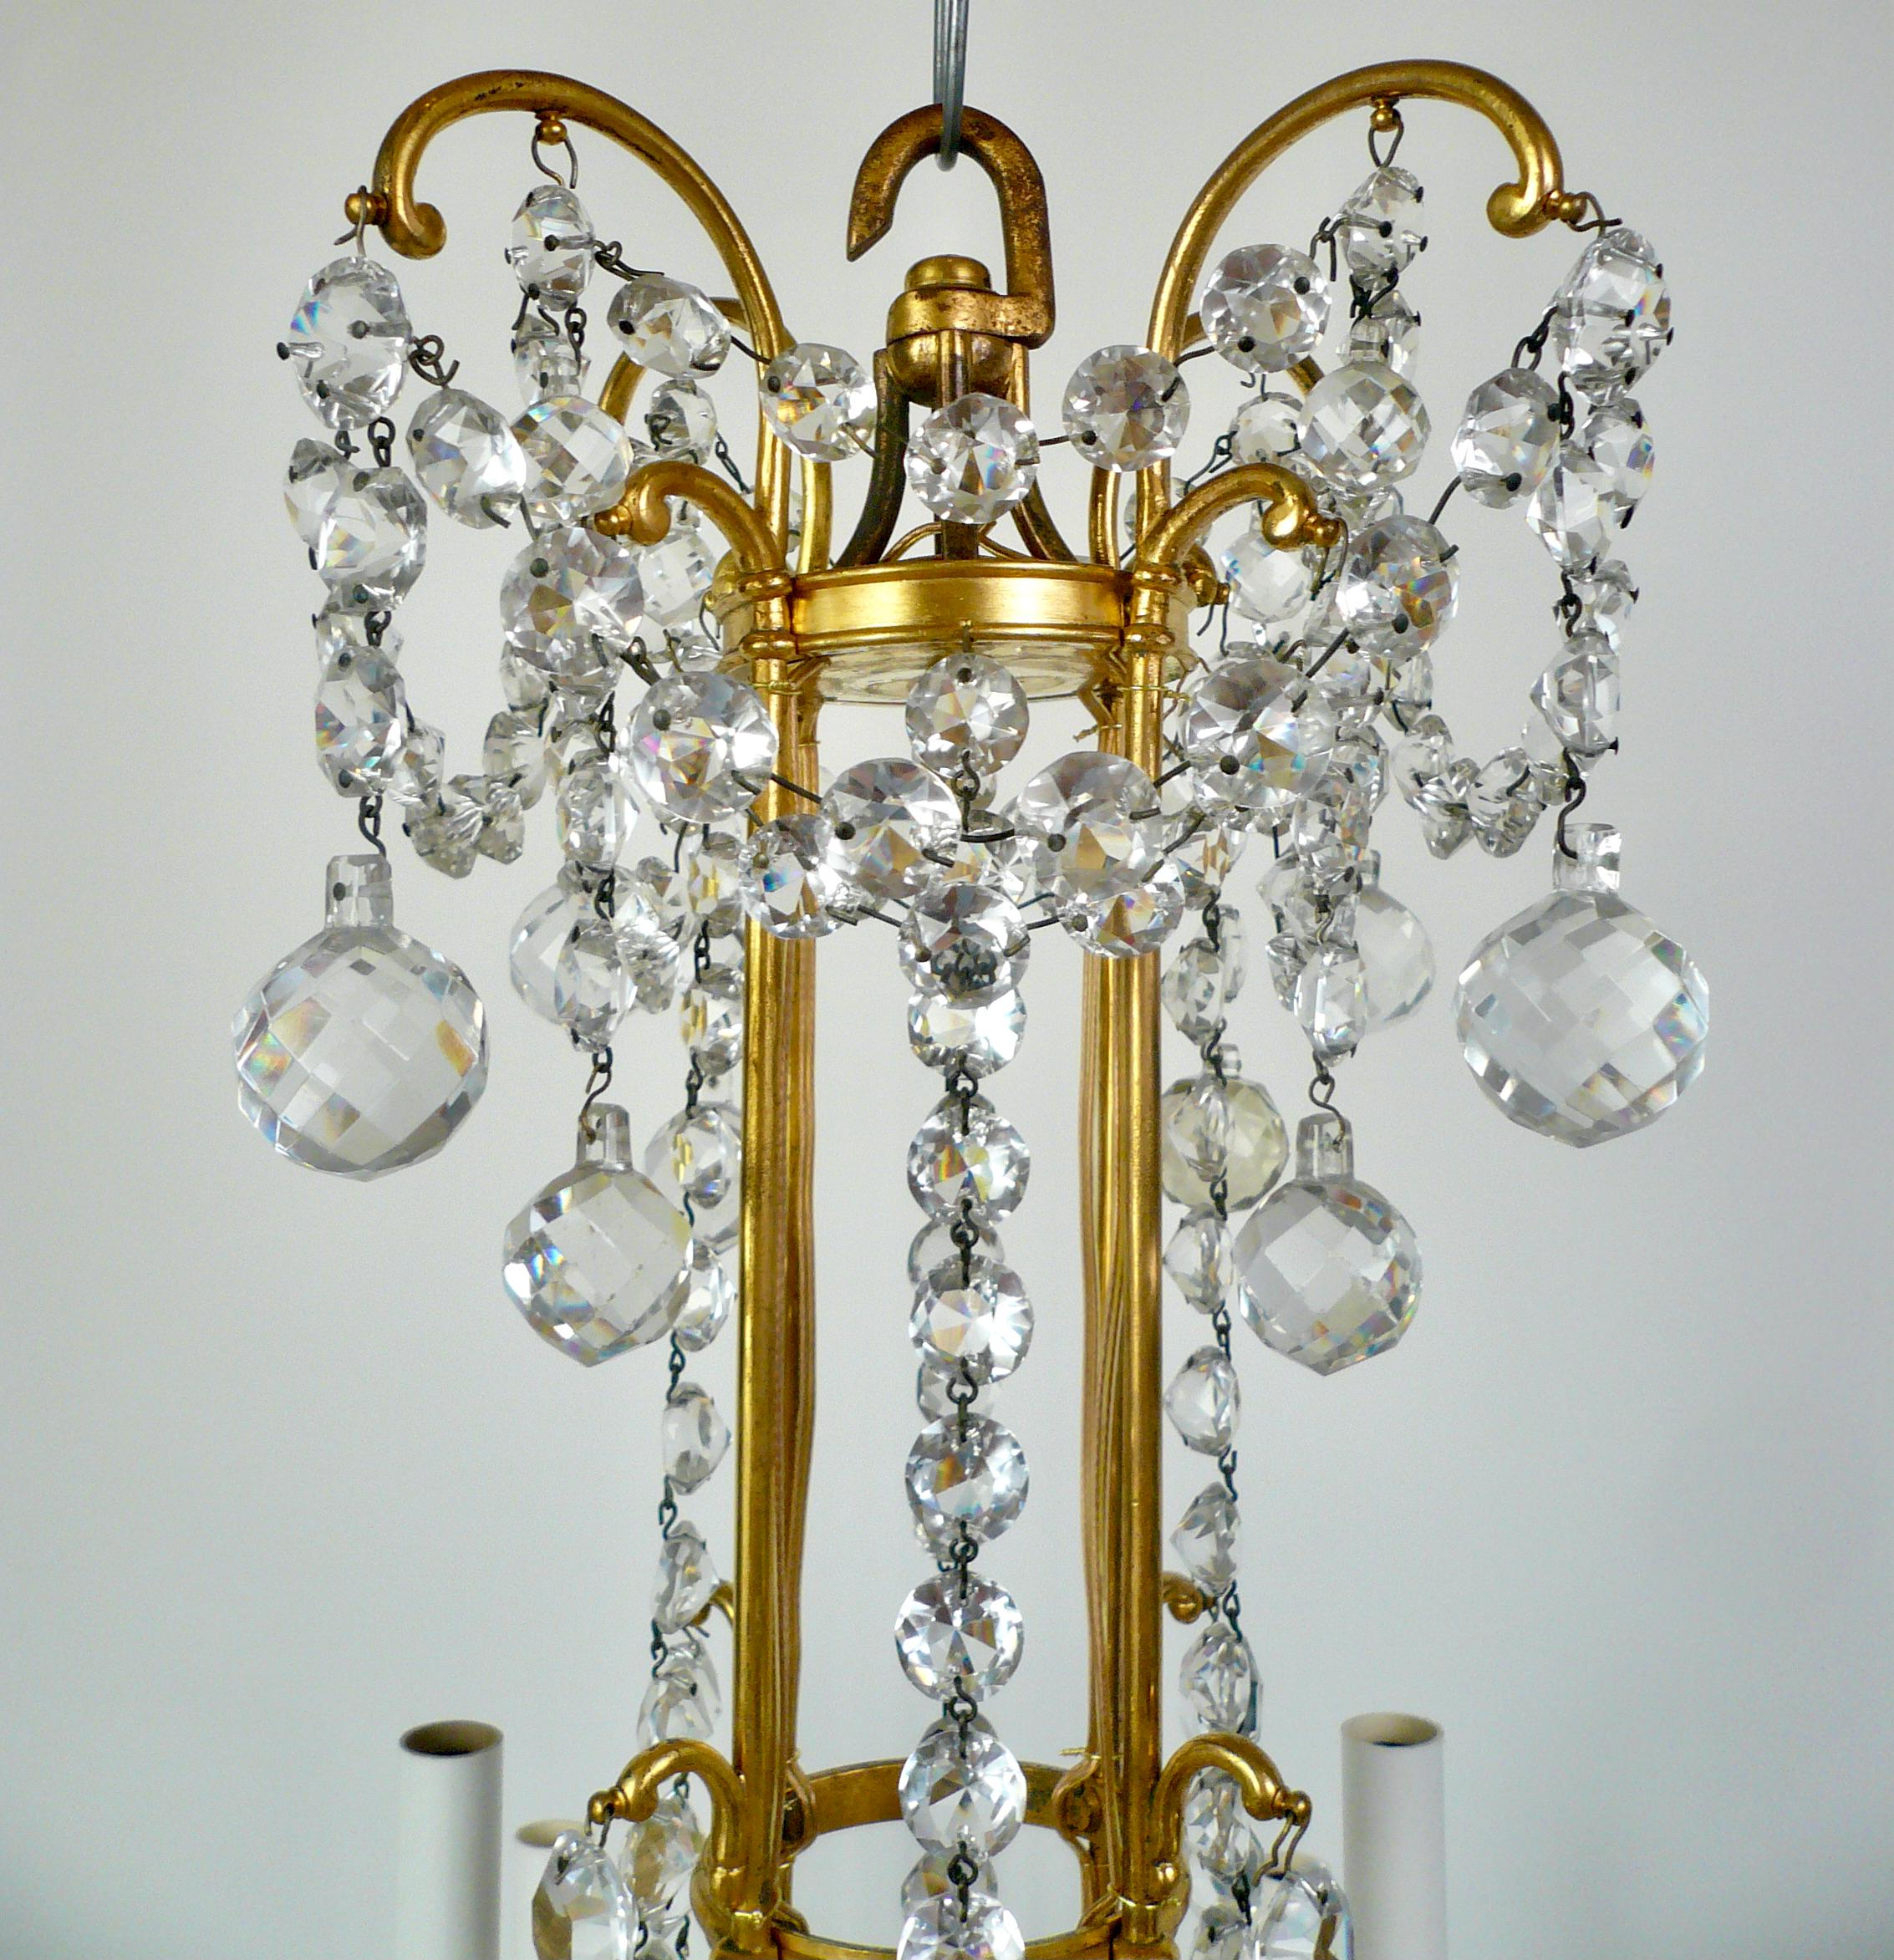 Signed Baccarat Gilt Bronze and Crystal 12 Light Chandelier, circa 1890 For Sale 5